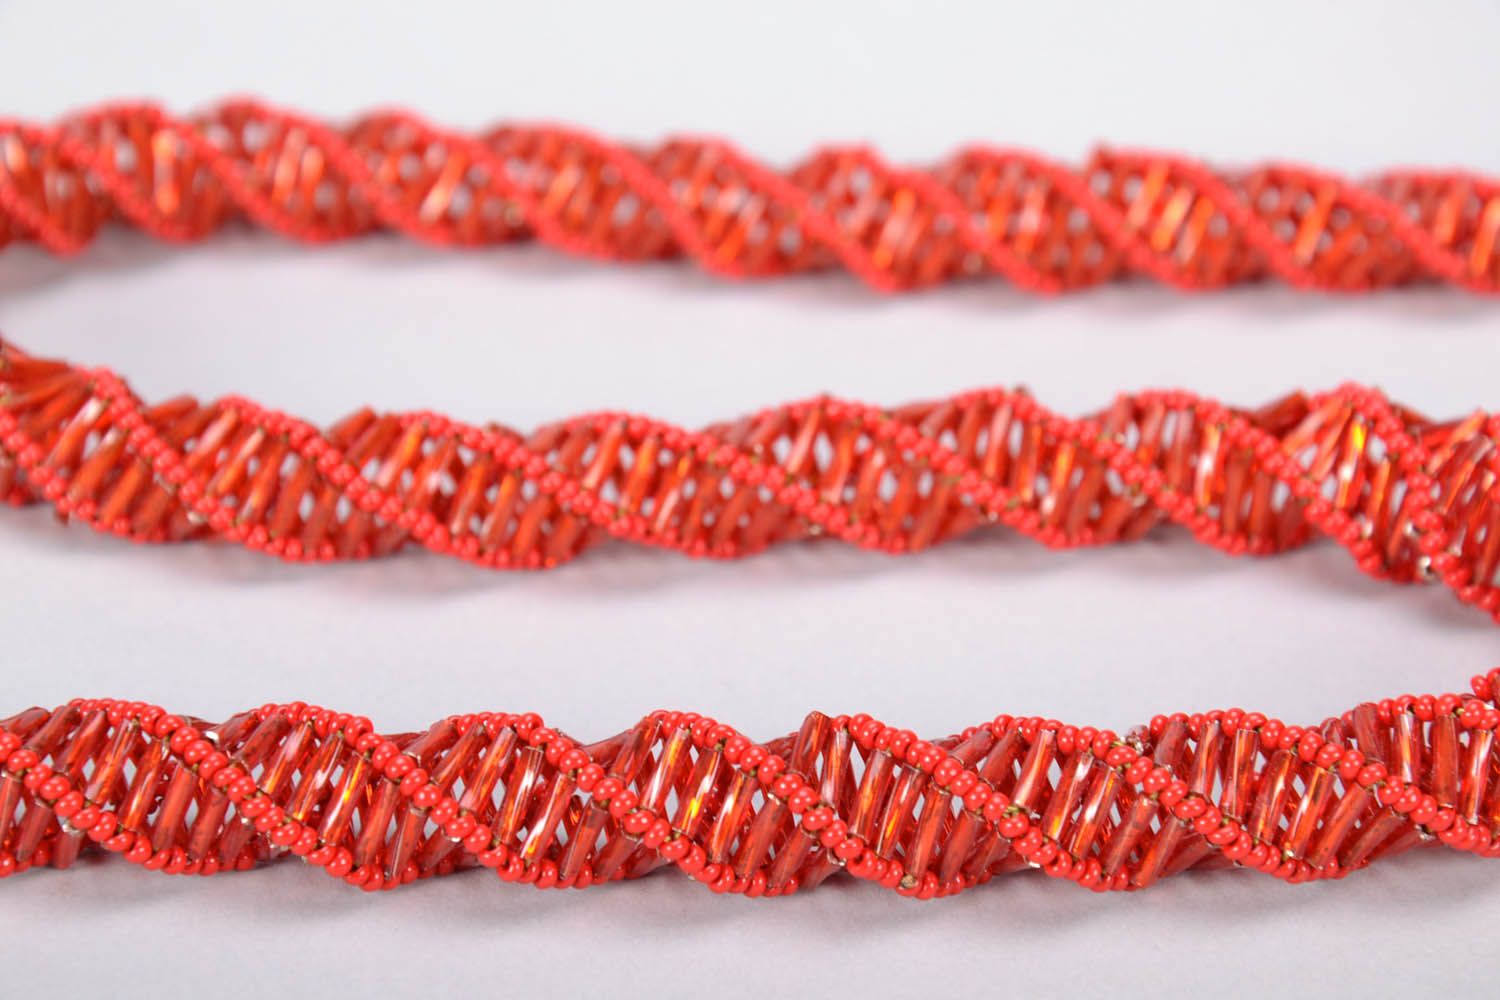 Lace beaded cord necklace photo 4